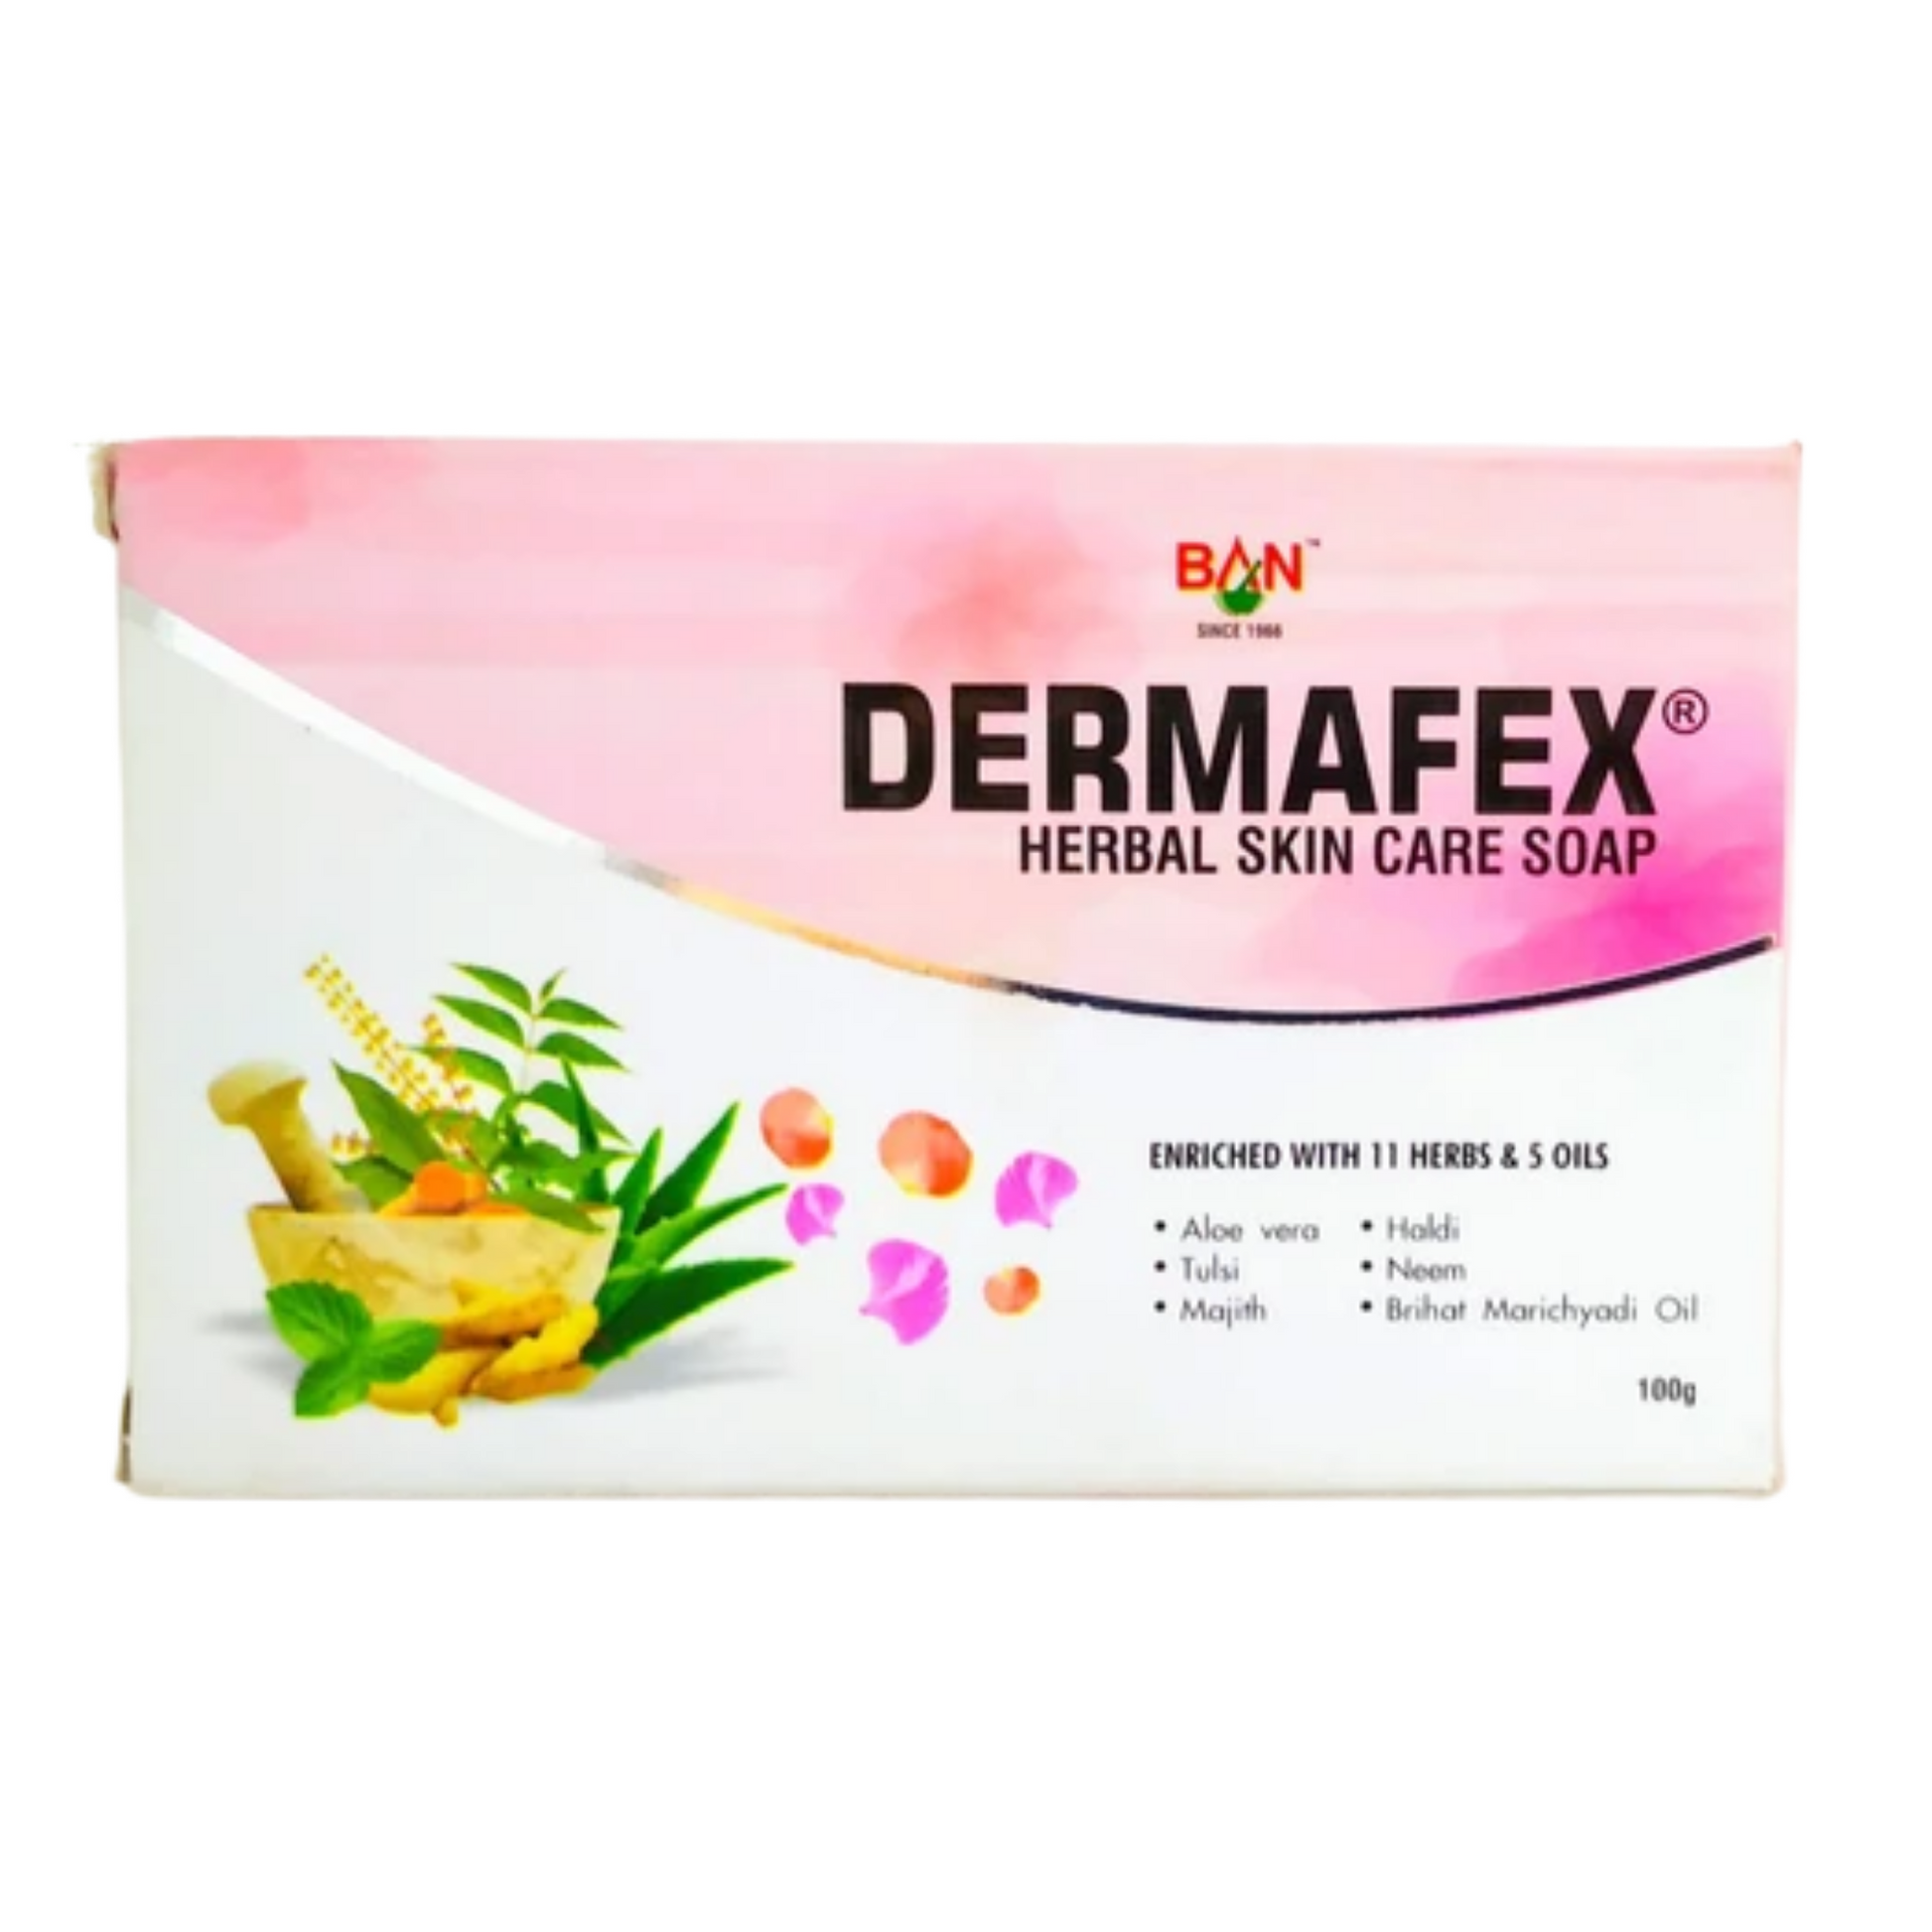 Shop Dermafex Soap 100gm at price 75.00 from Banlabs Online - Ayush Care